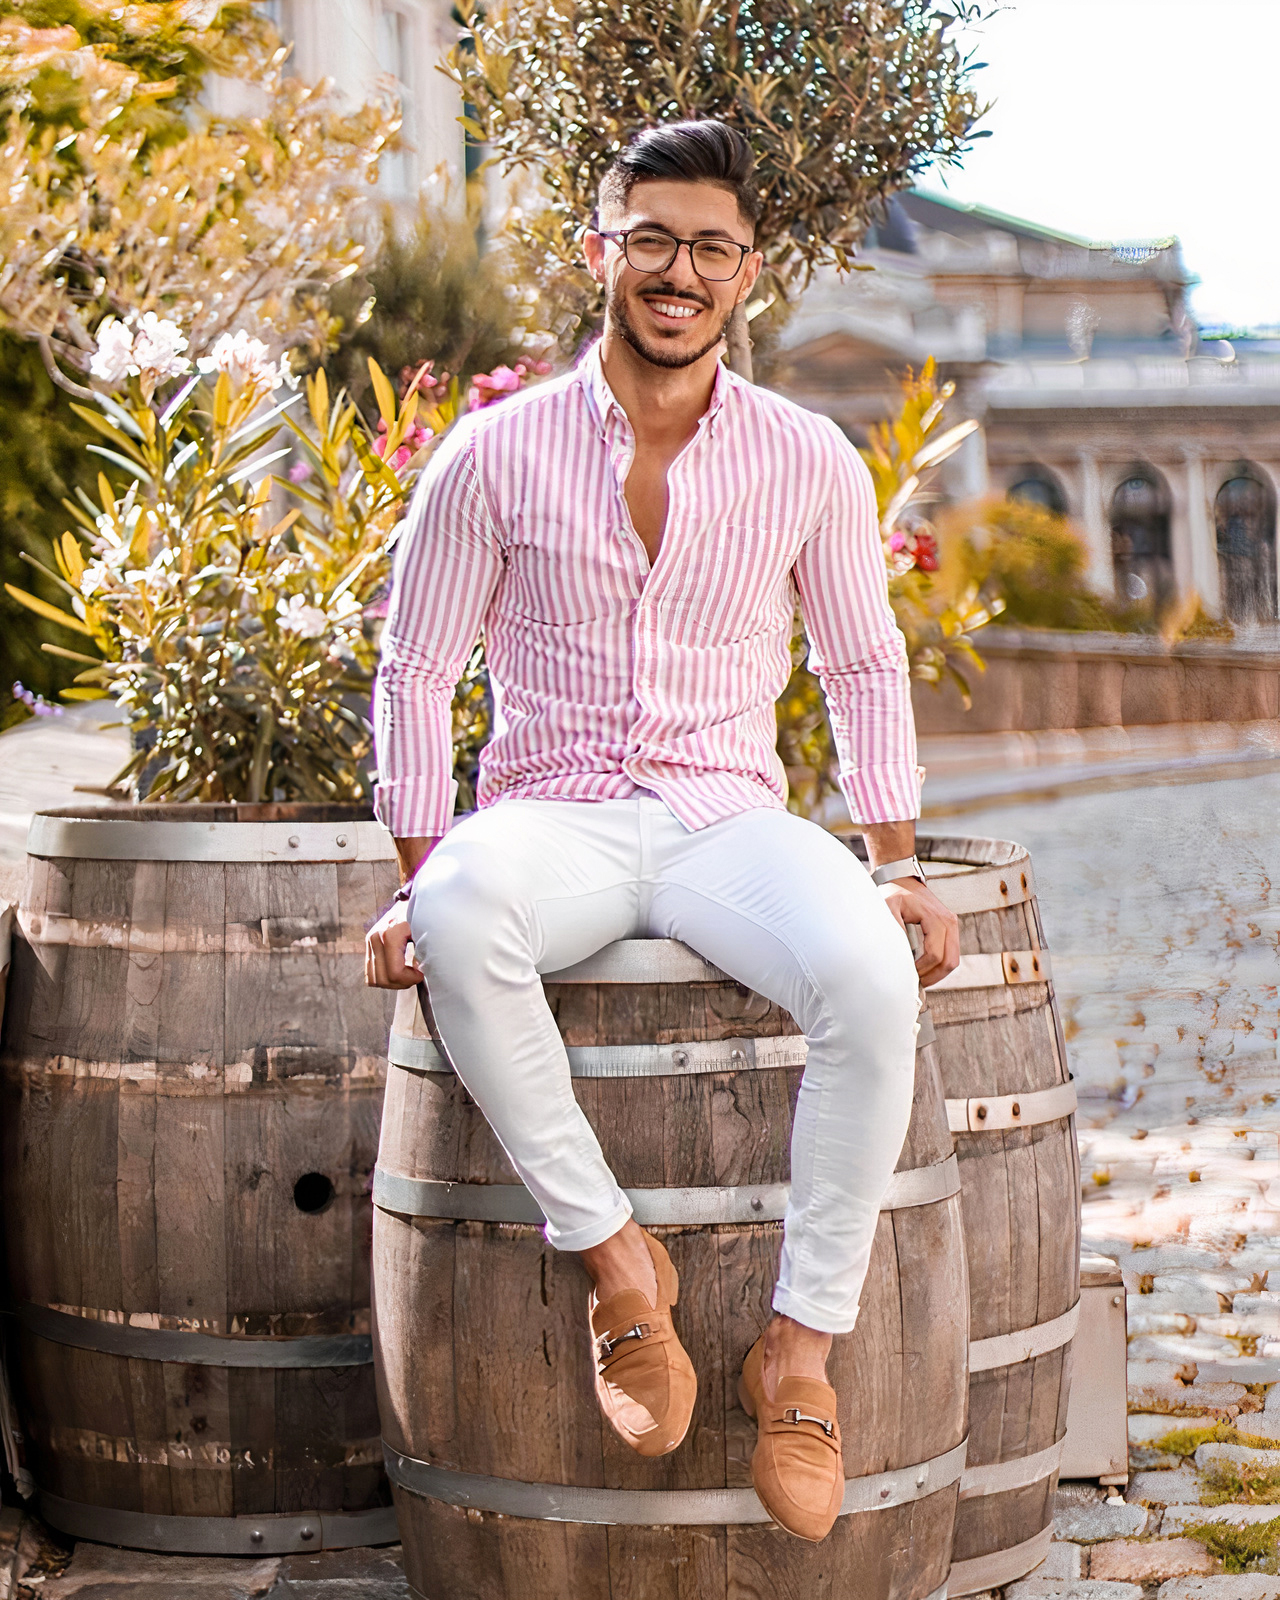 Pink striped shirt, white pants, and brown loafers